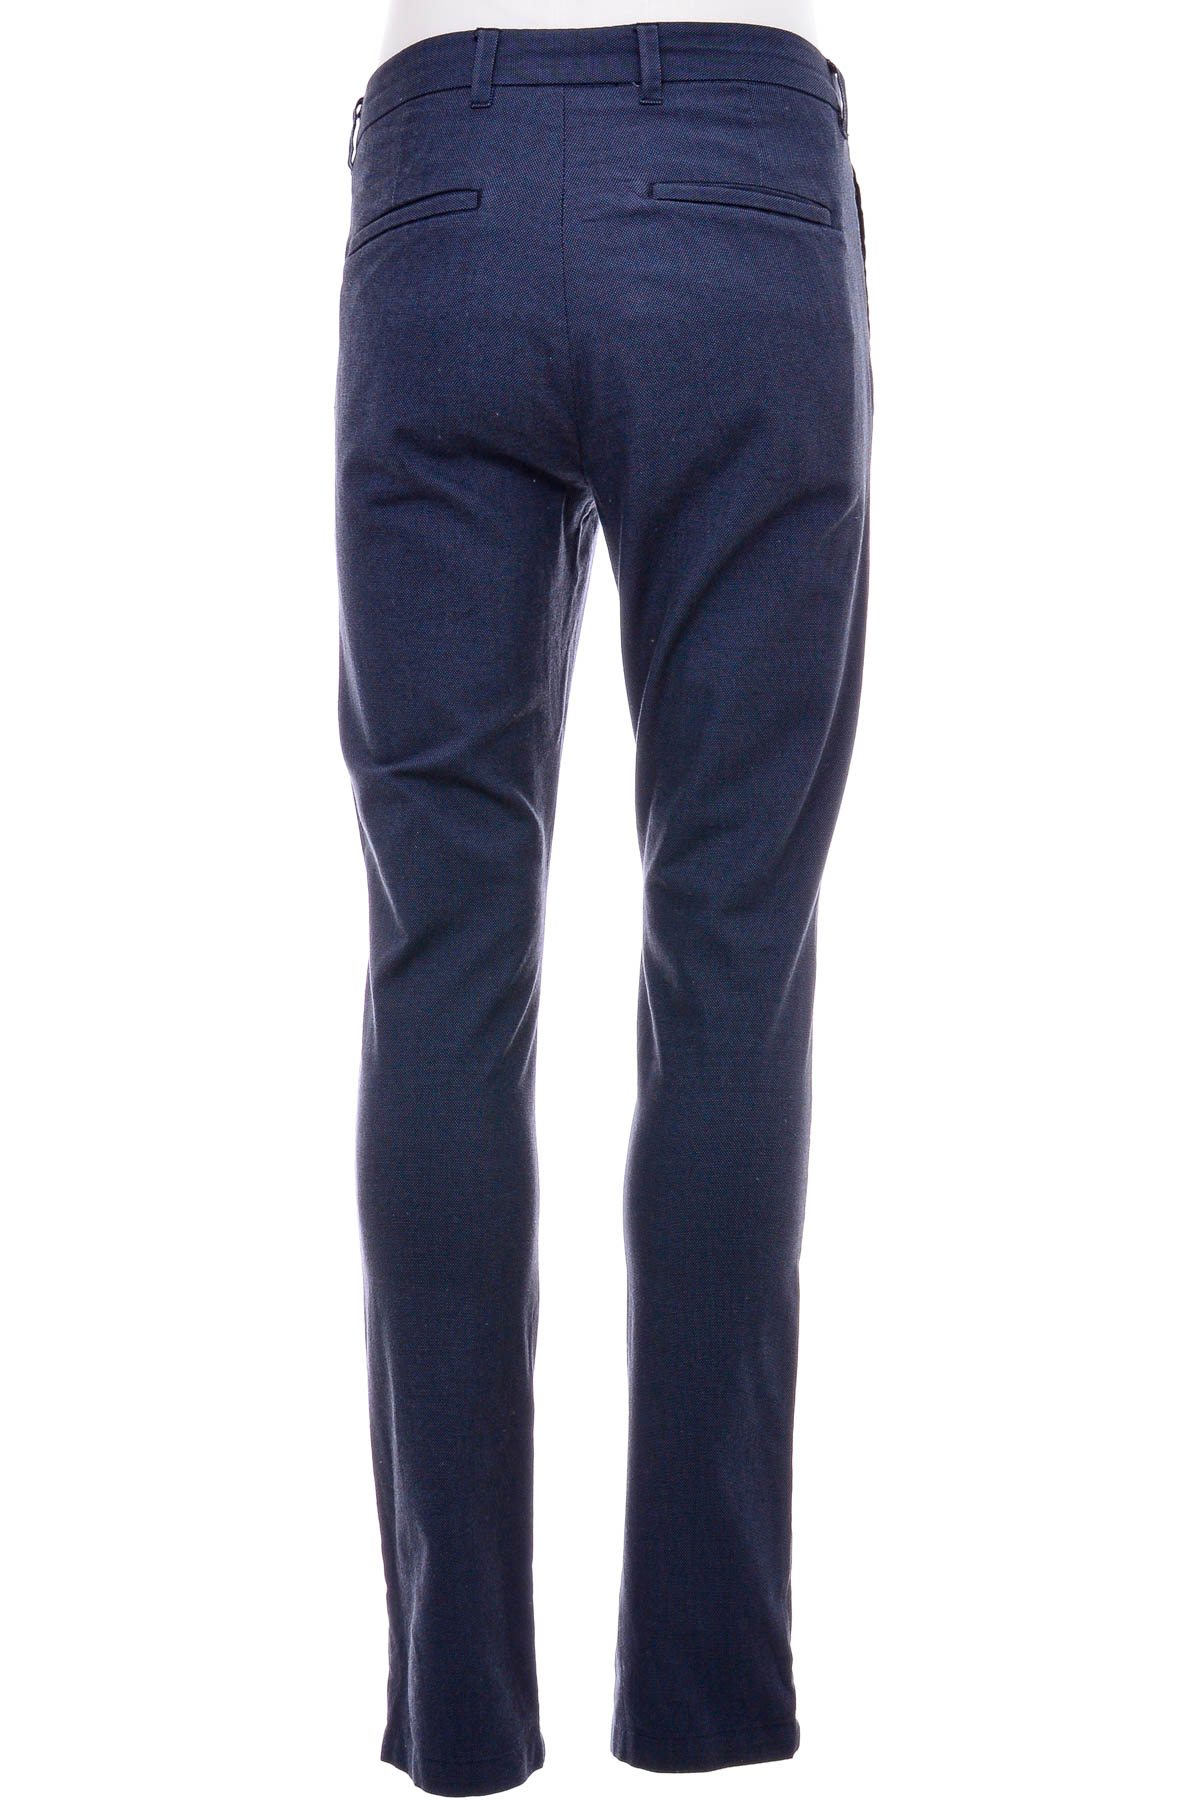 Men's trousers - RESERVED - 1